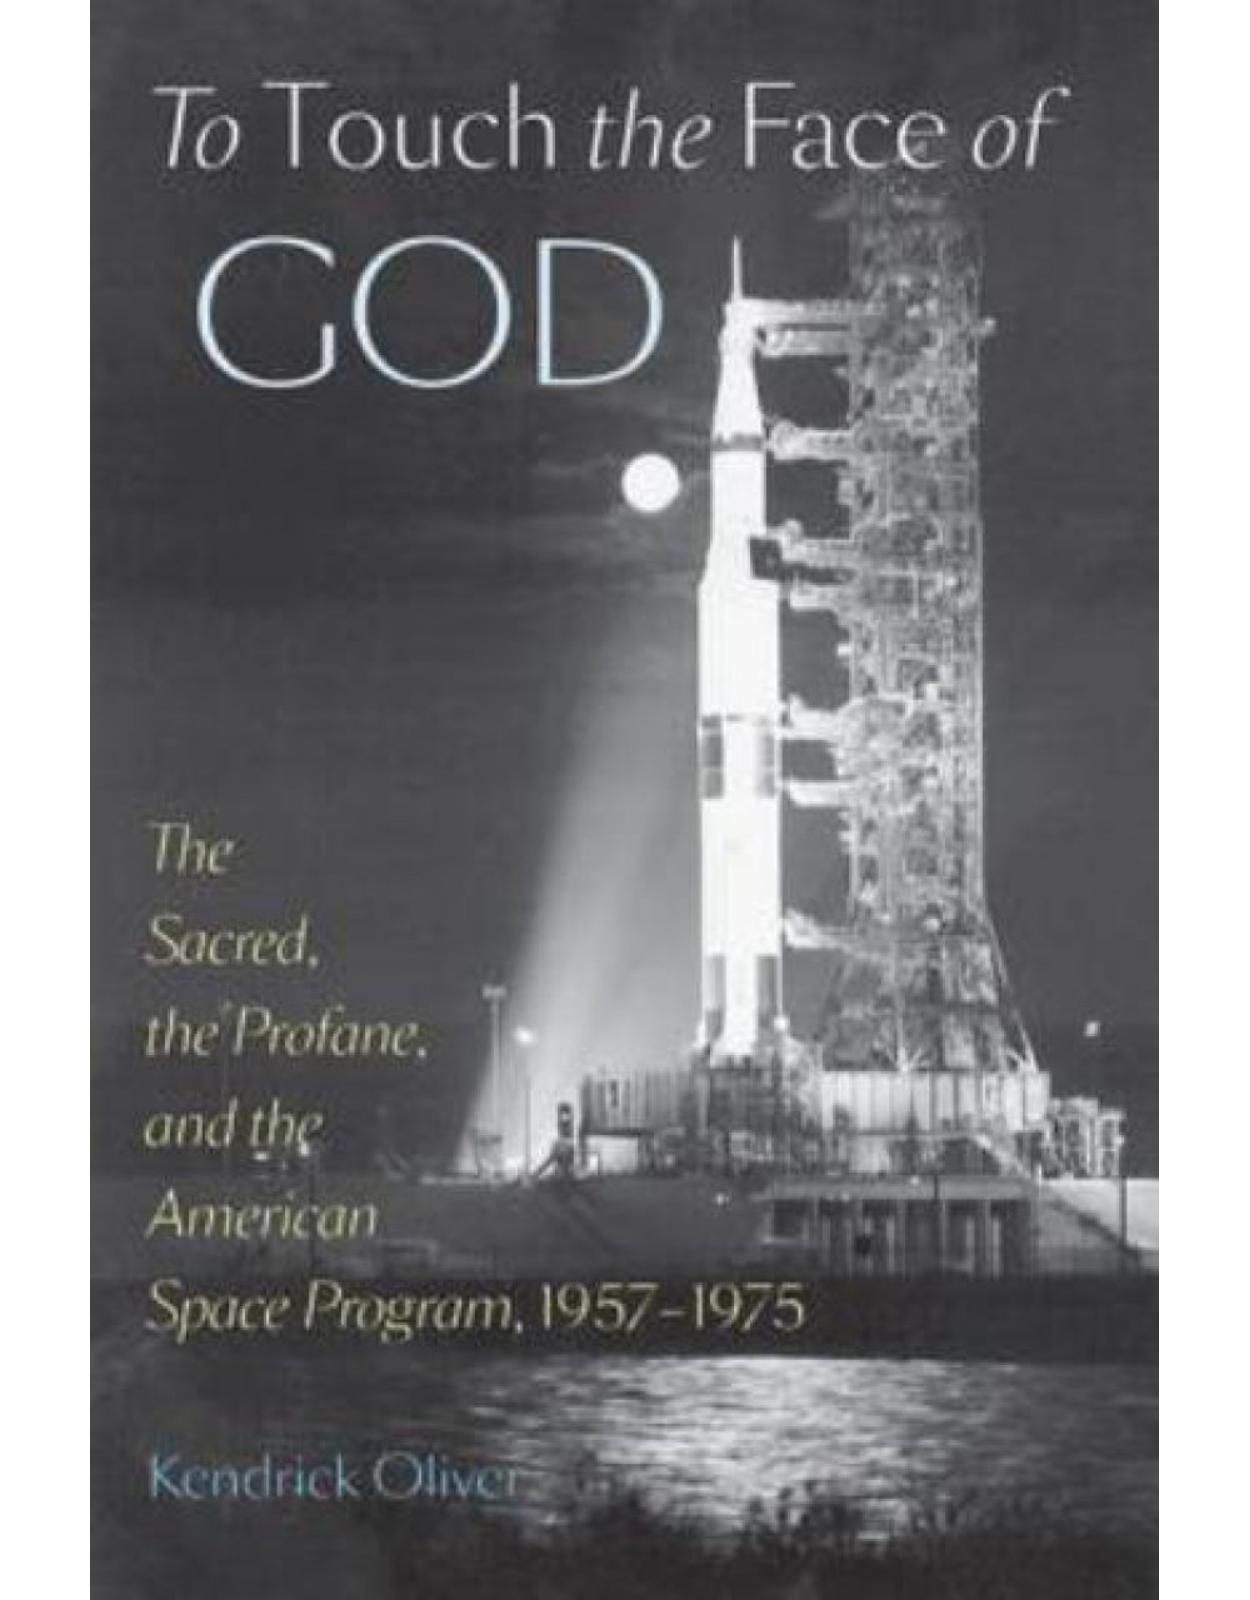 To Touch the Face of God. The Sacred, the Profane, and the American Space Program, 1957-1975